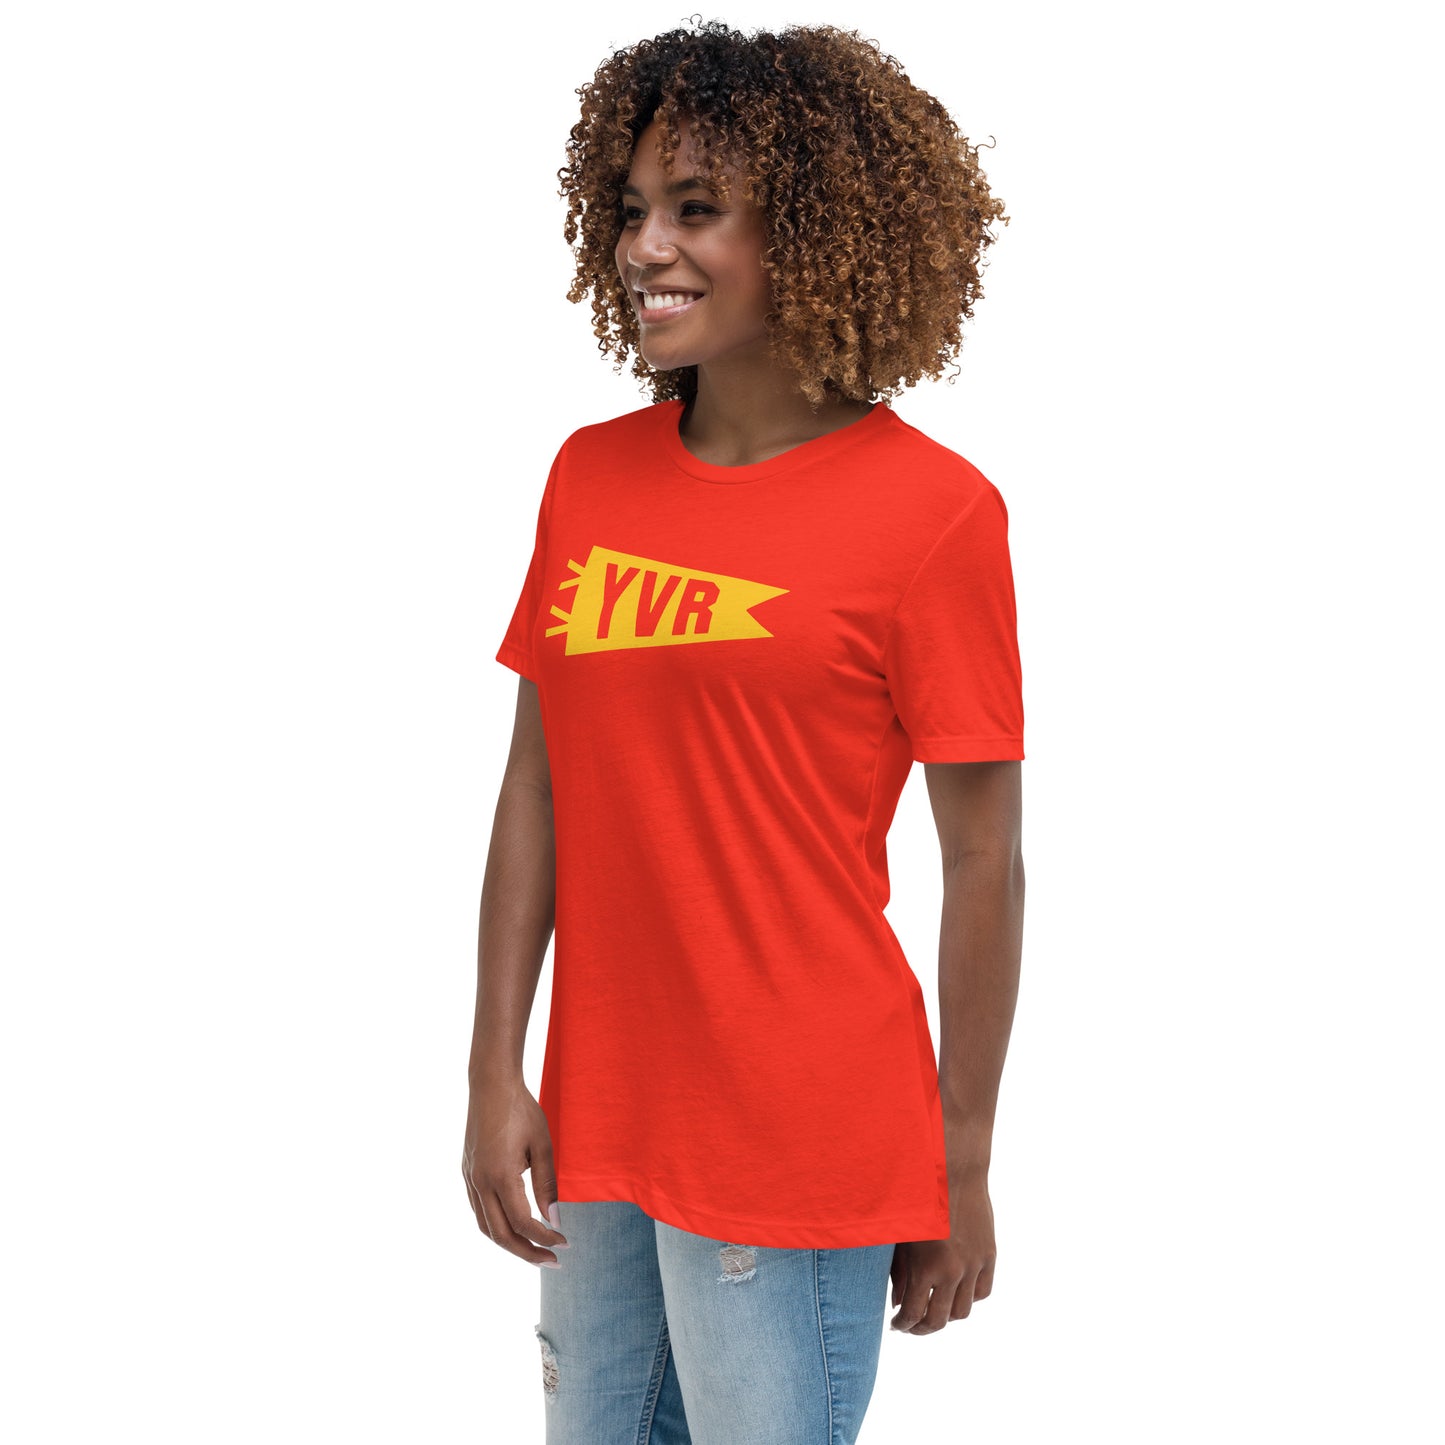 Airport Code Women's Tee - Yellow Graphic • YVR Vancouver • YHM Designs - Image 04